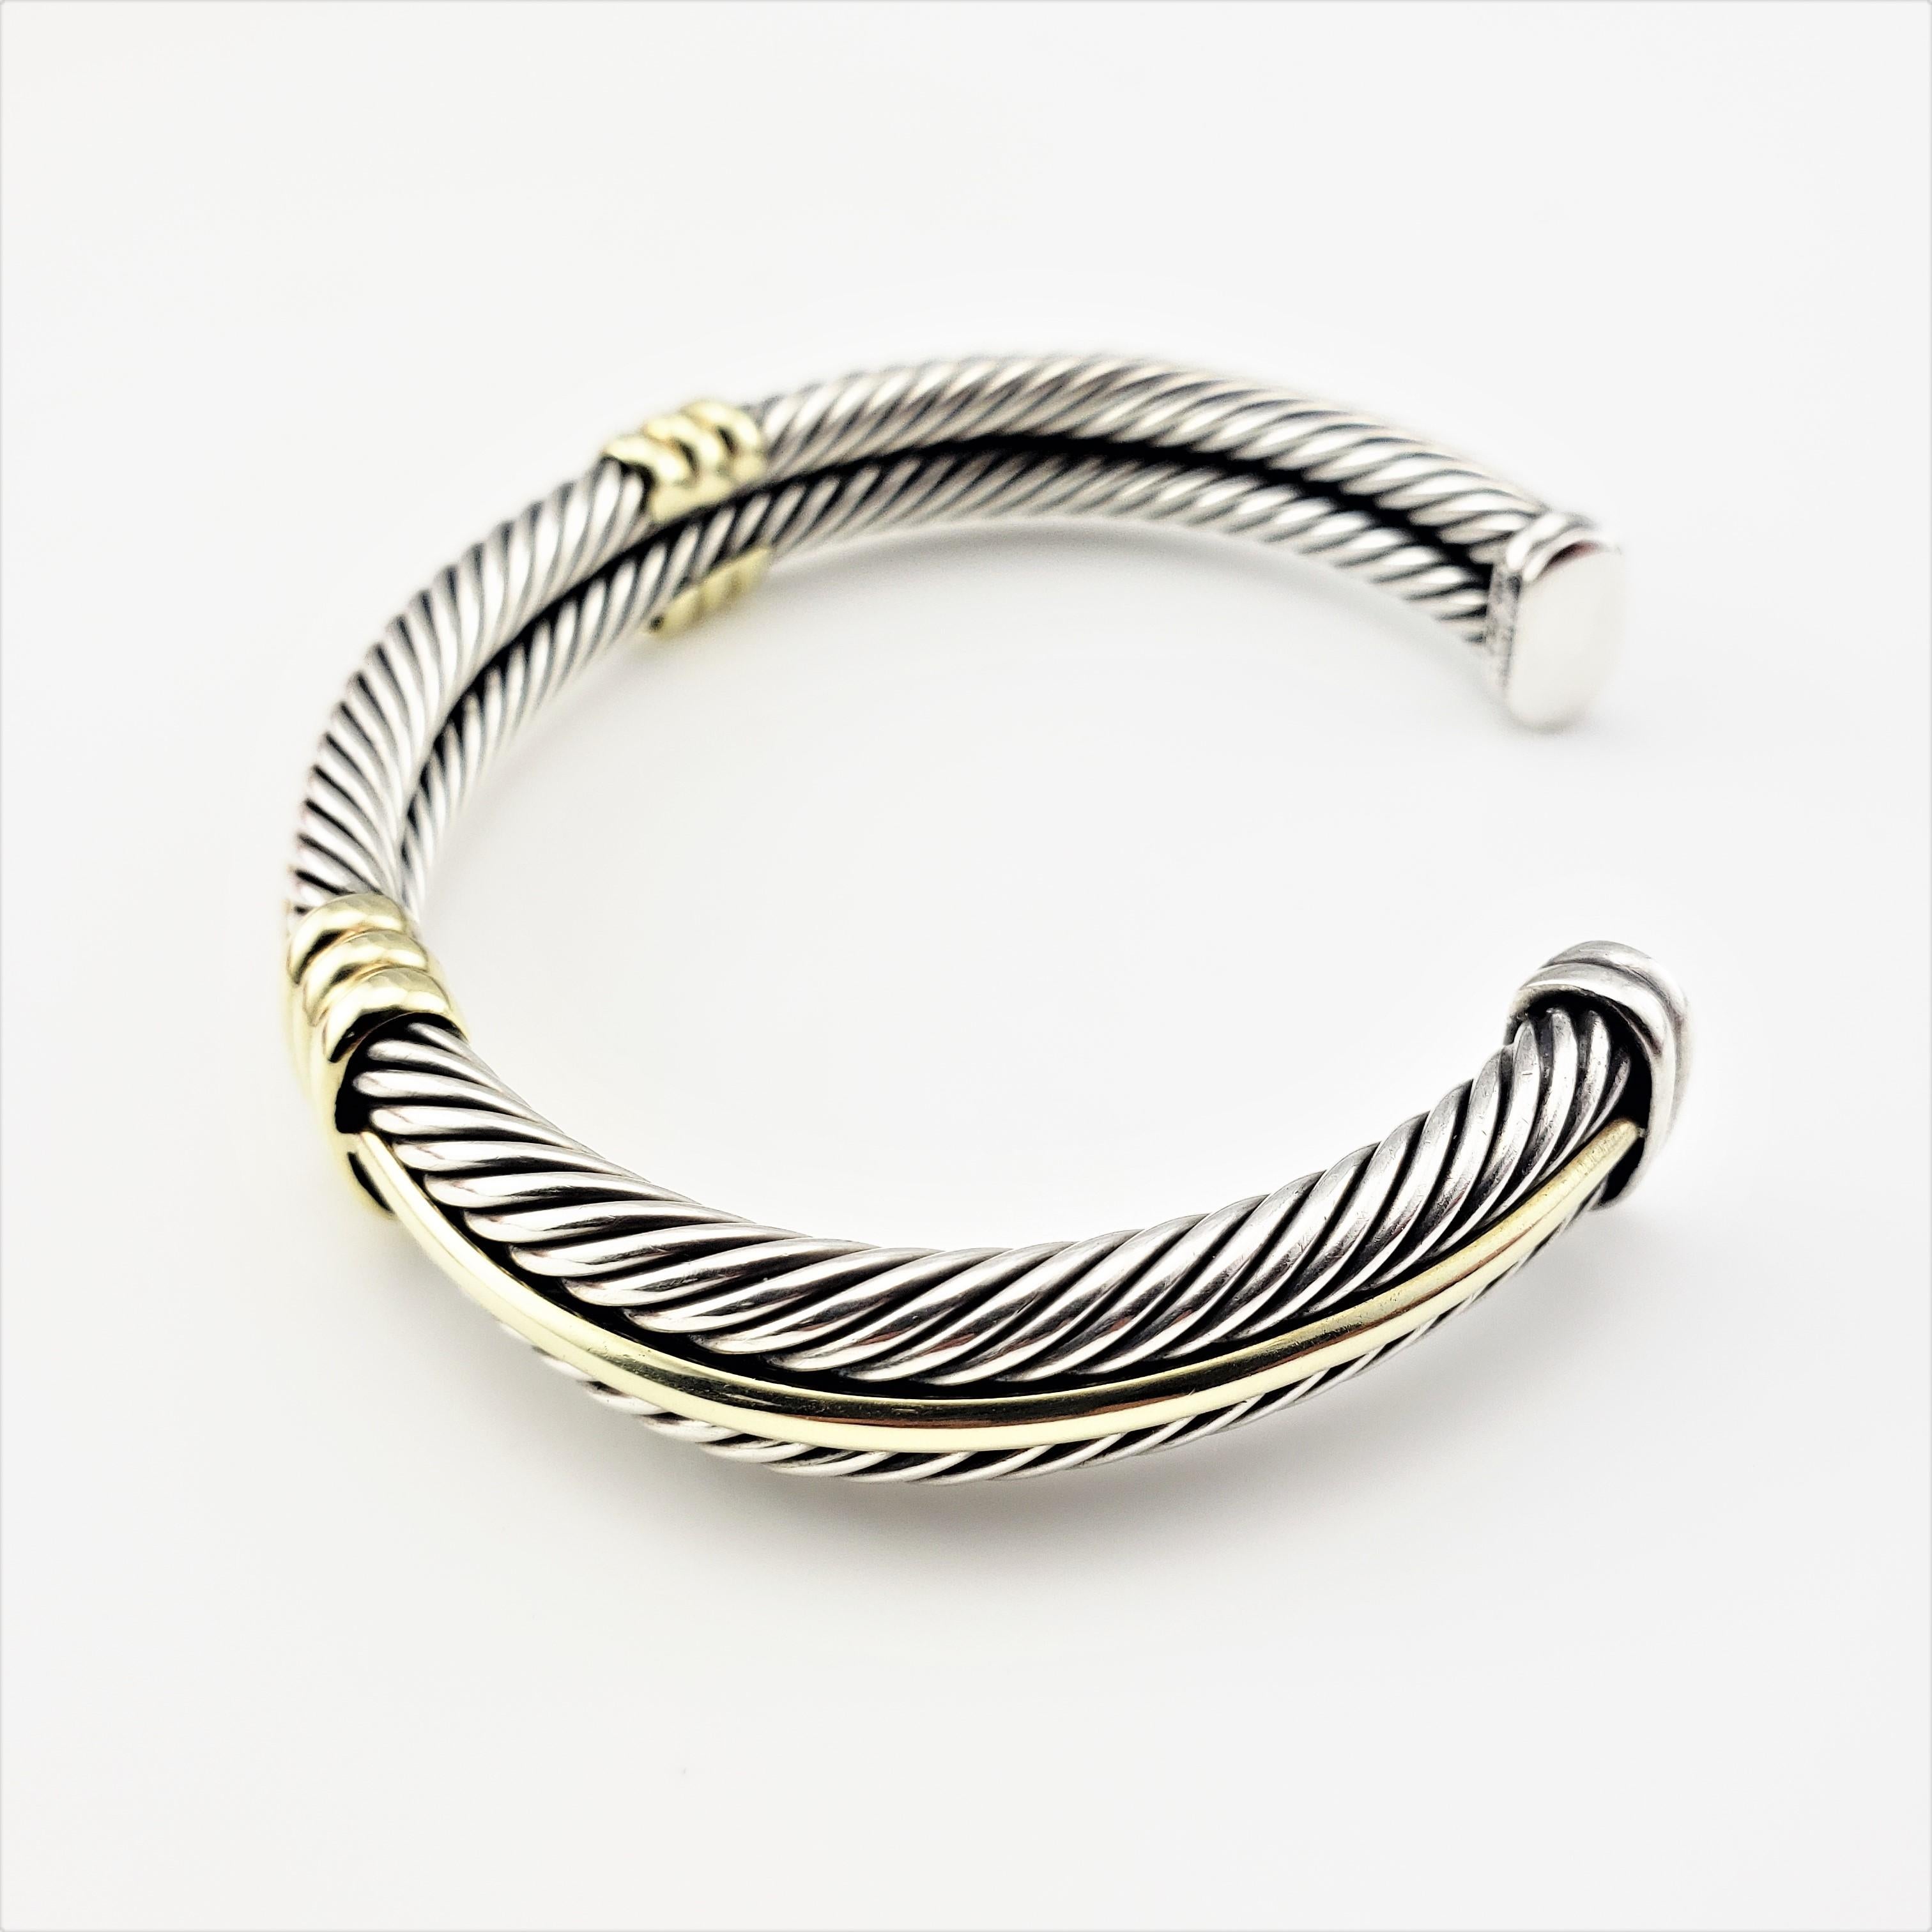 David Yurman Sterling Silver and 14 Karat Yellow Gold Cable Cuff Bracelet-

This elegant cuff bracelet by David Yurman is crafted in beautifully detailed 14K yellow gold and sterling silver.

This bracelet is 8